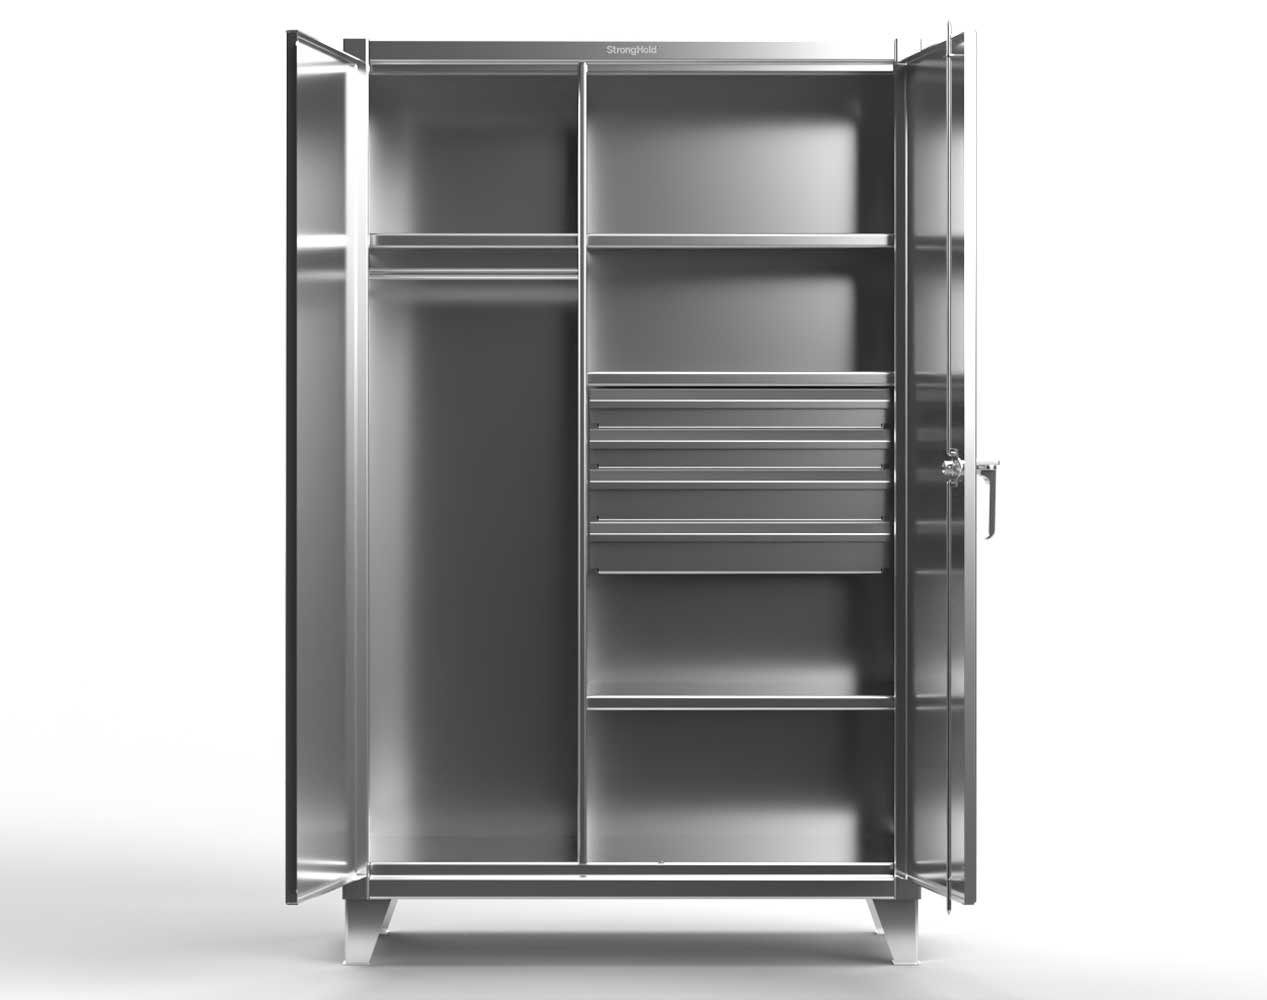 Extreme Duty 12 GA Stainless Steel Uniform Cabinet with 4 Drawers, 4 Shelves - 48 In. W x 24 In. D x 78 In. H